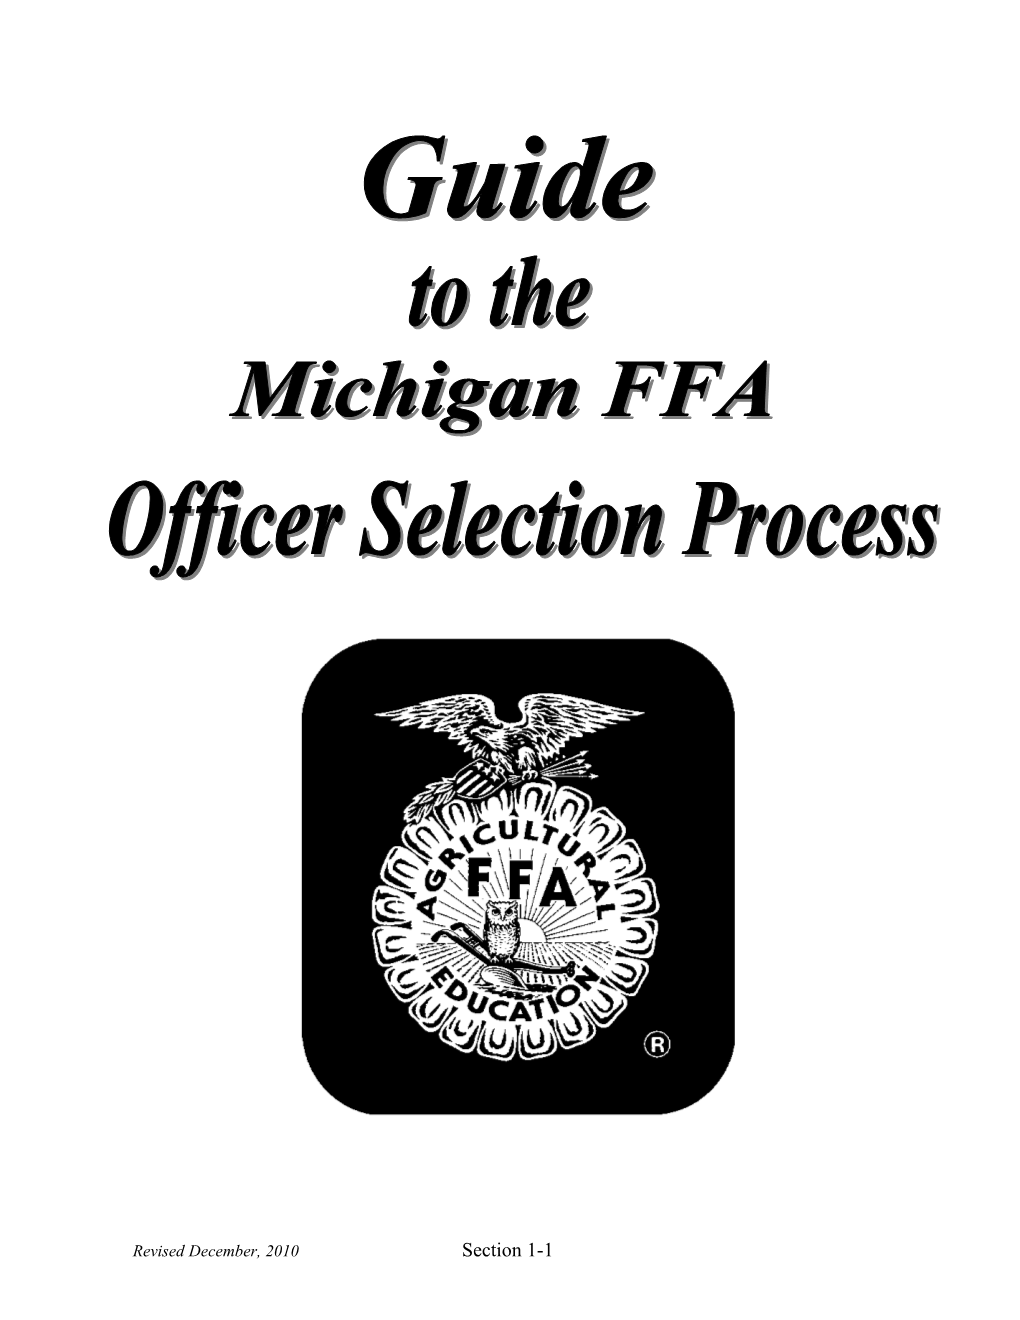 History of the FFA National Officer Selection Process